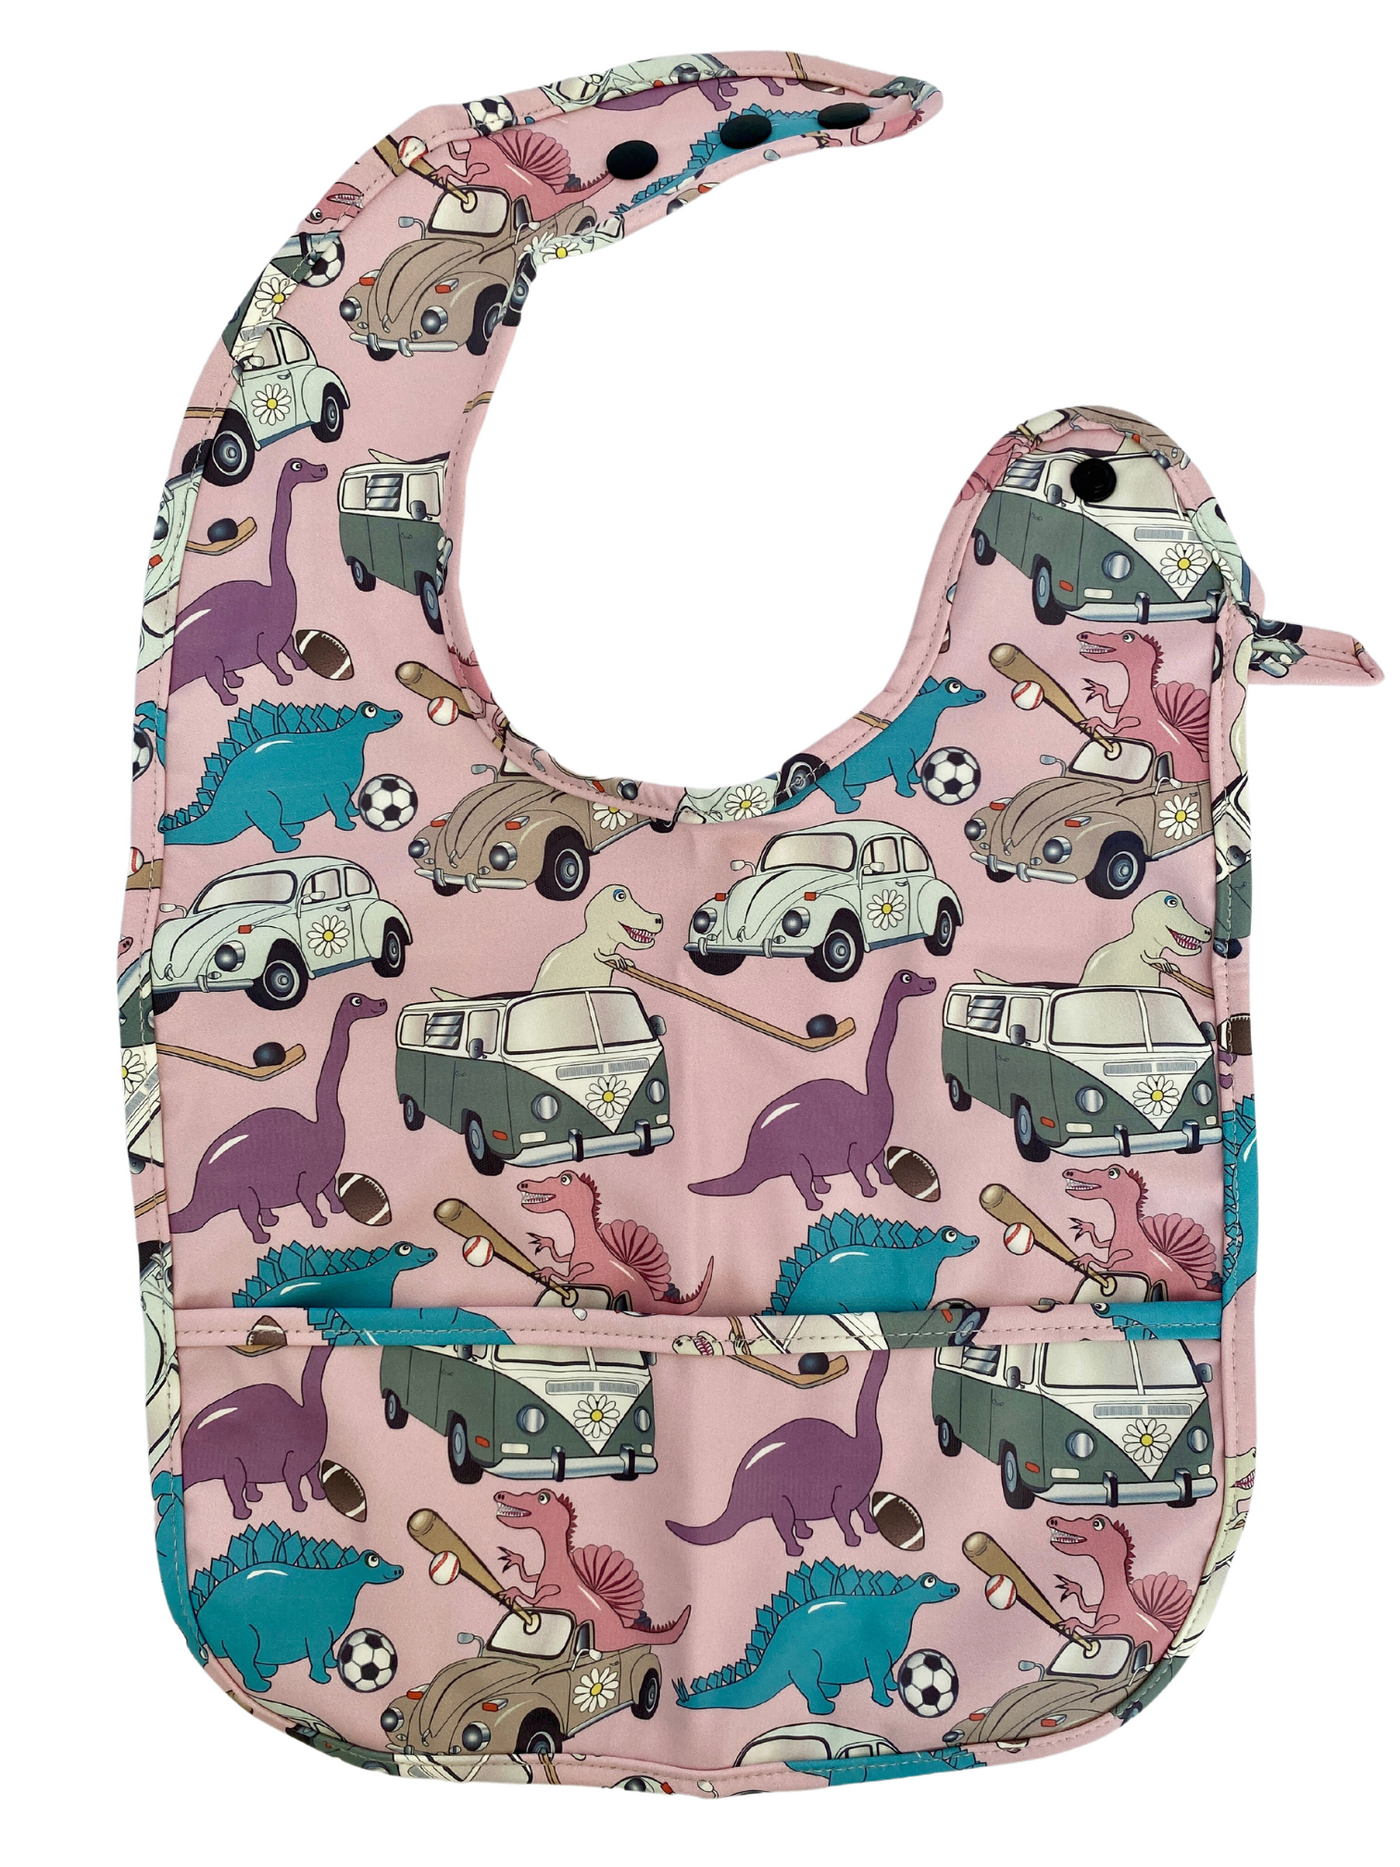 Waterproof Bib with Pocket: The Dinosaurs in their Car